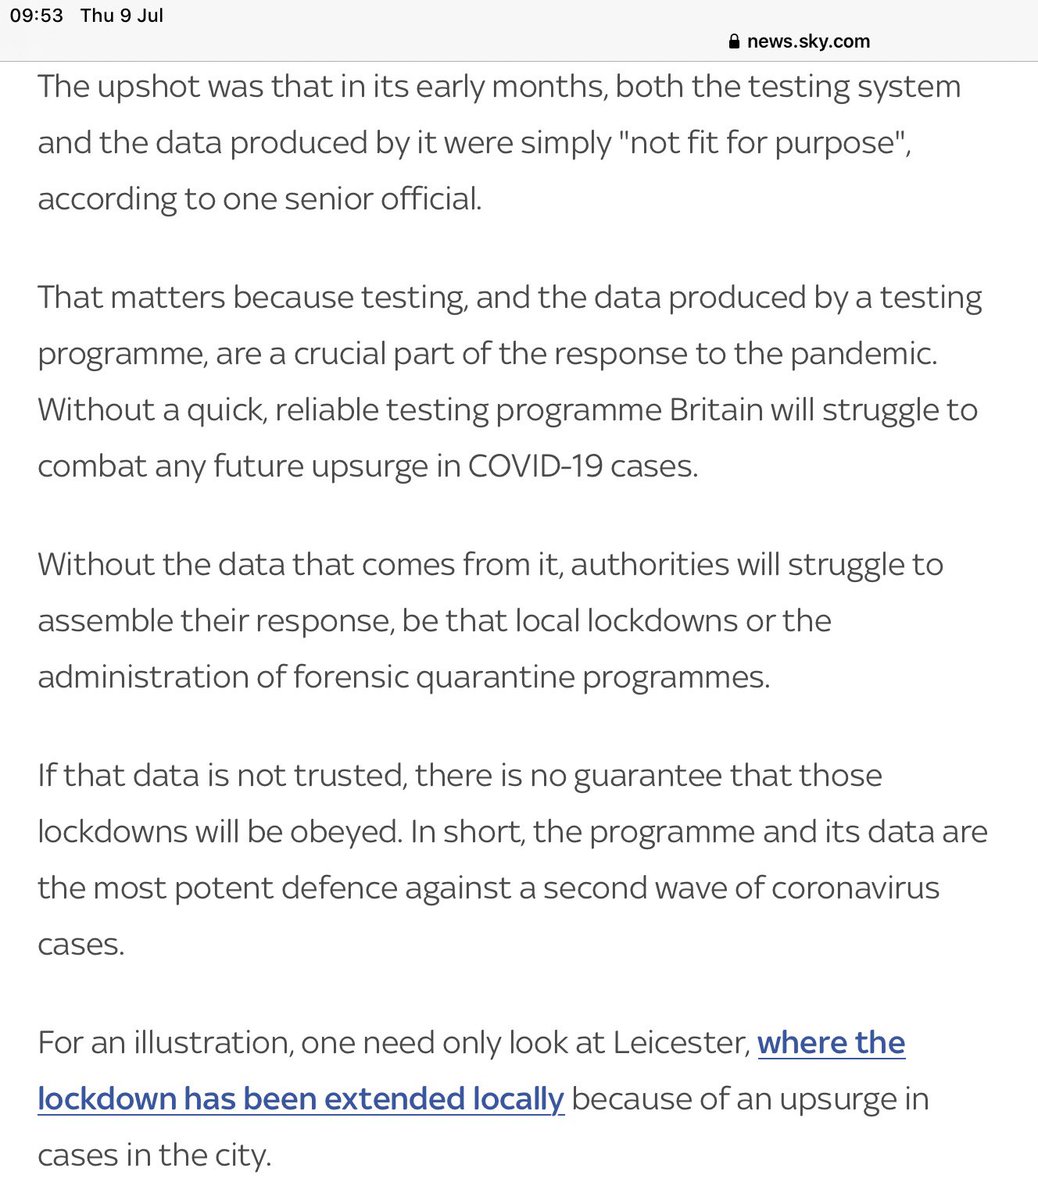 6/ Key officials did not have the data needed to track down flare ups really early.As with Manchester, Liverpool and Leicester.Yet that is one key purpose of testing. Find it early. Hunt it down early.  Support & enforce isolation.Break the chain of transmission.